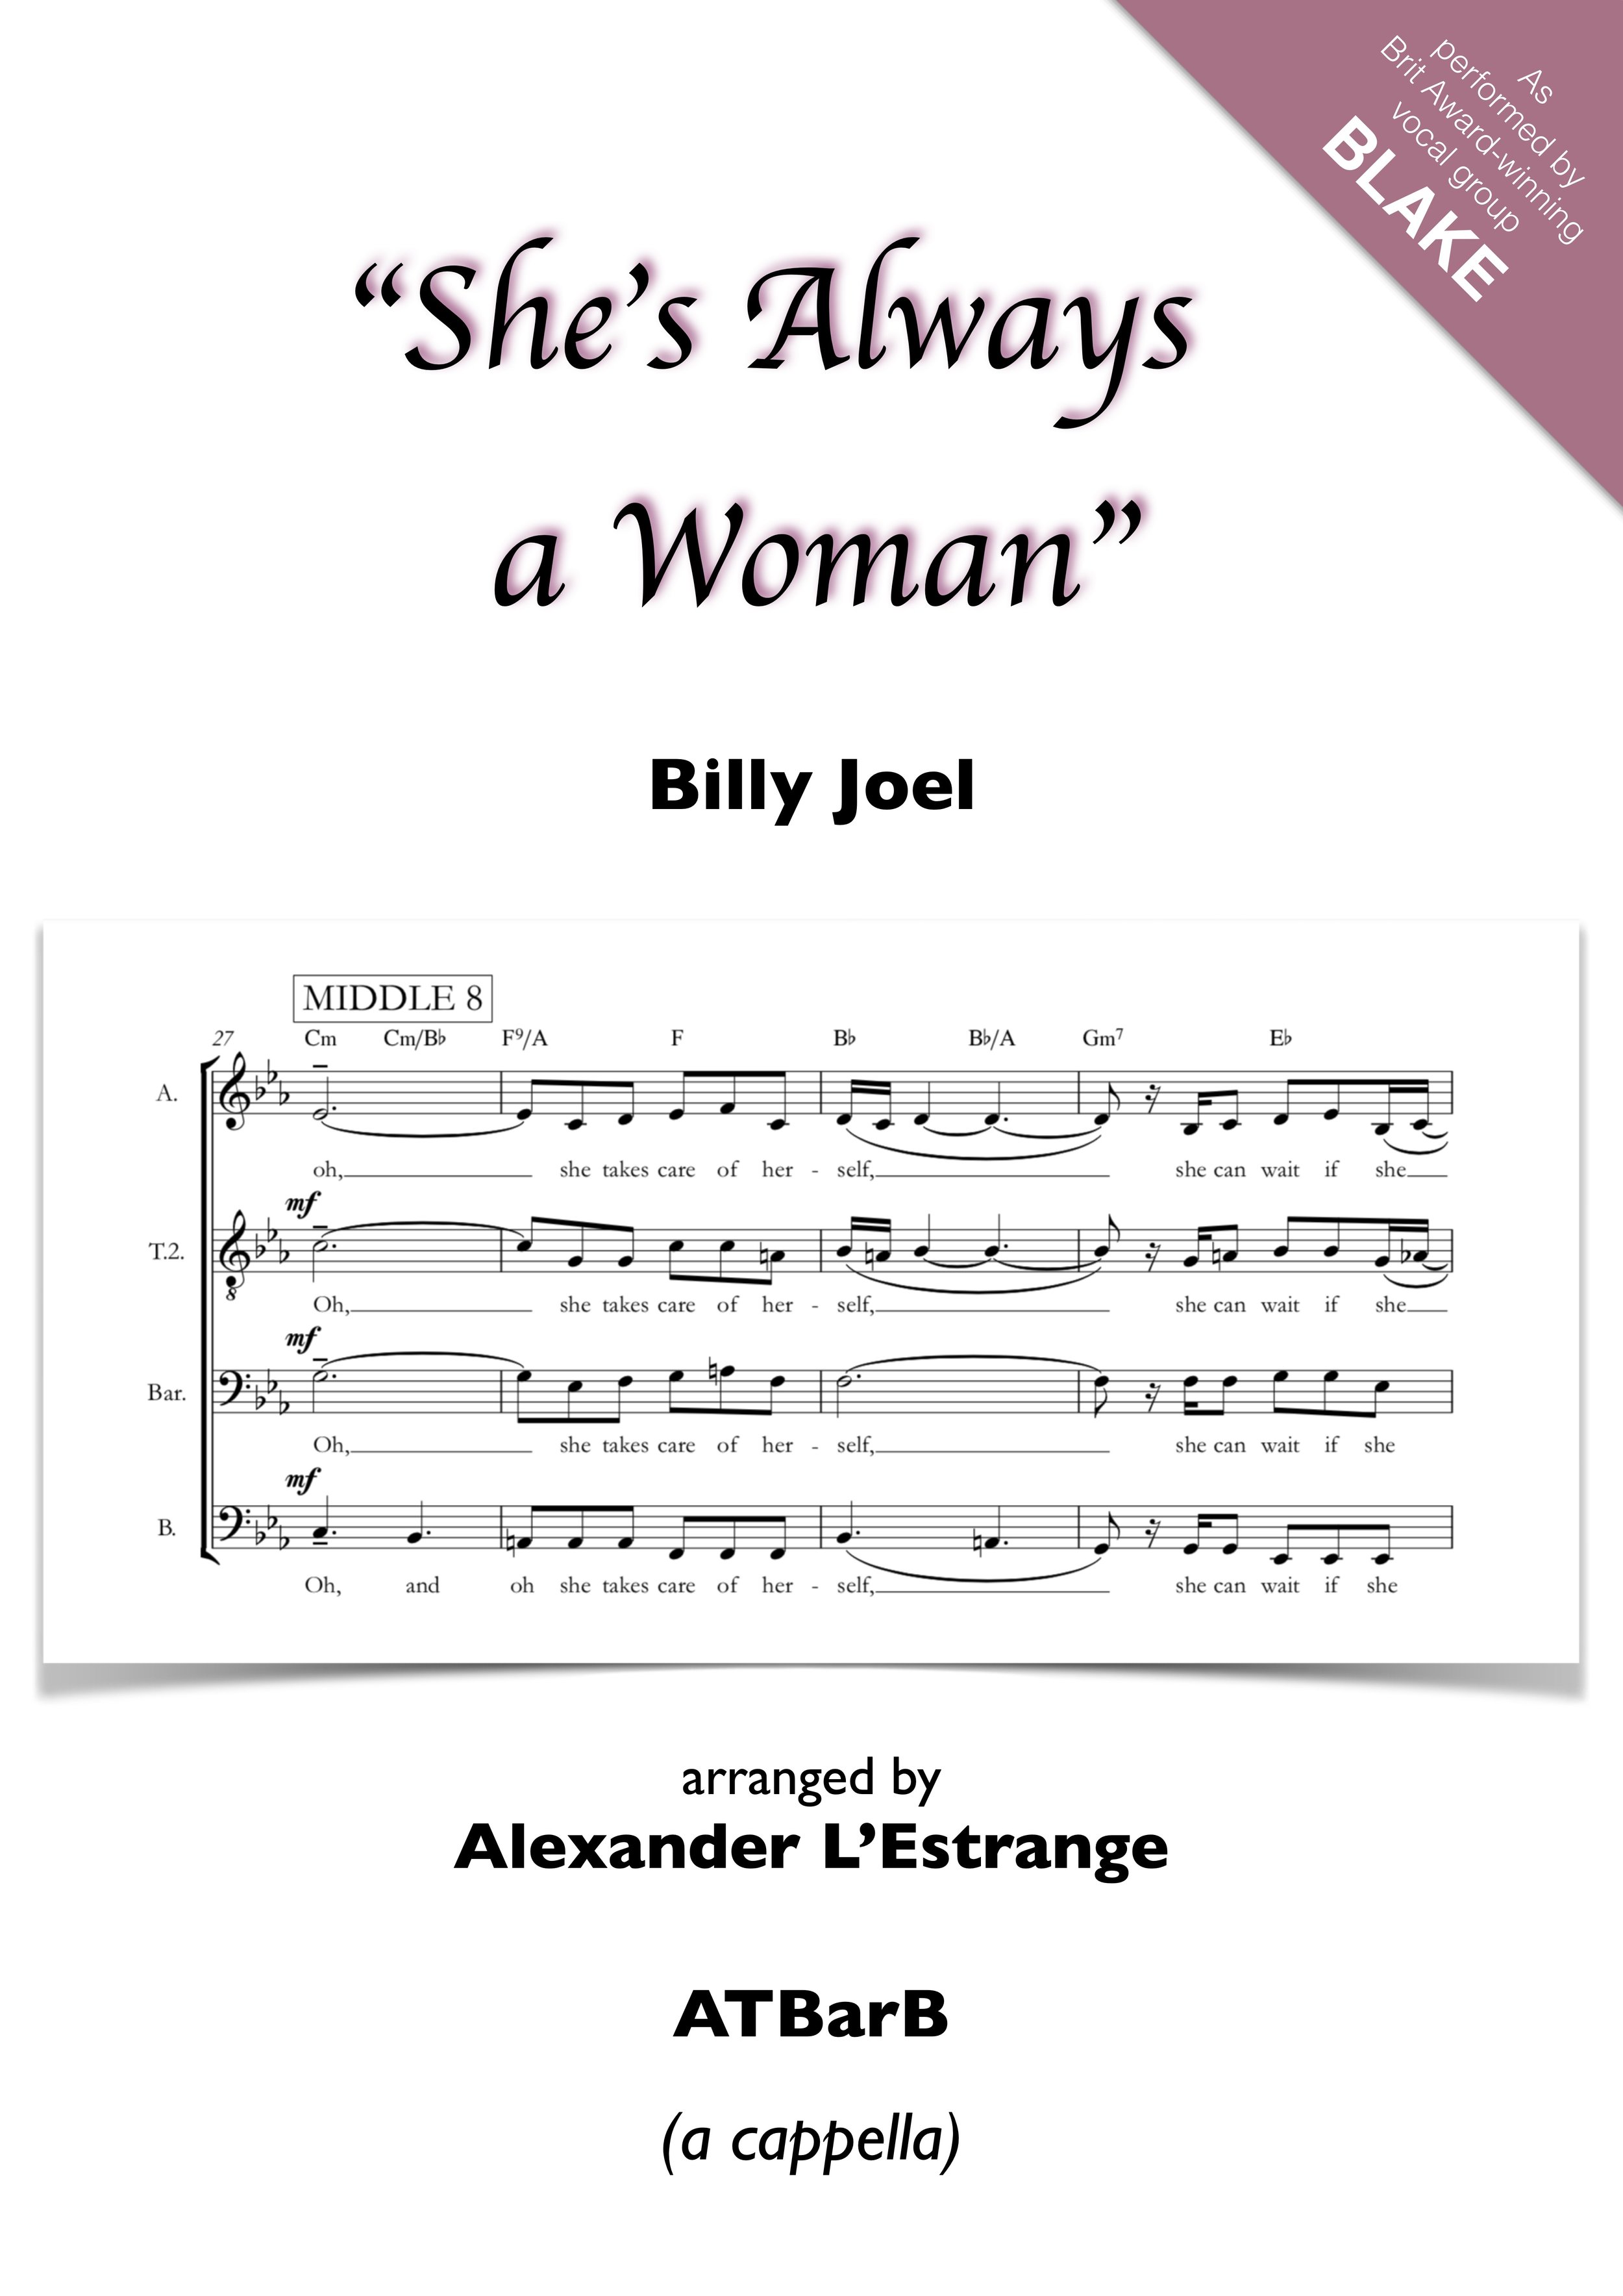 She's Always a Woman ATBarB COVER.jpg